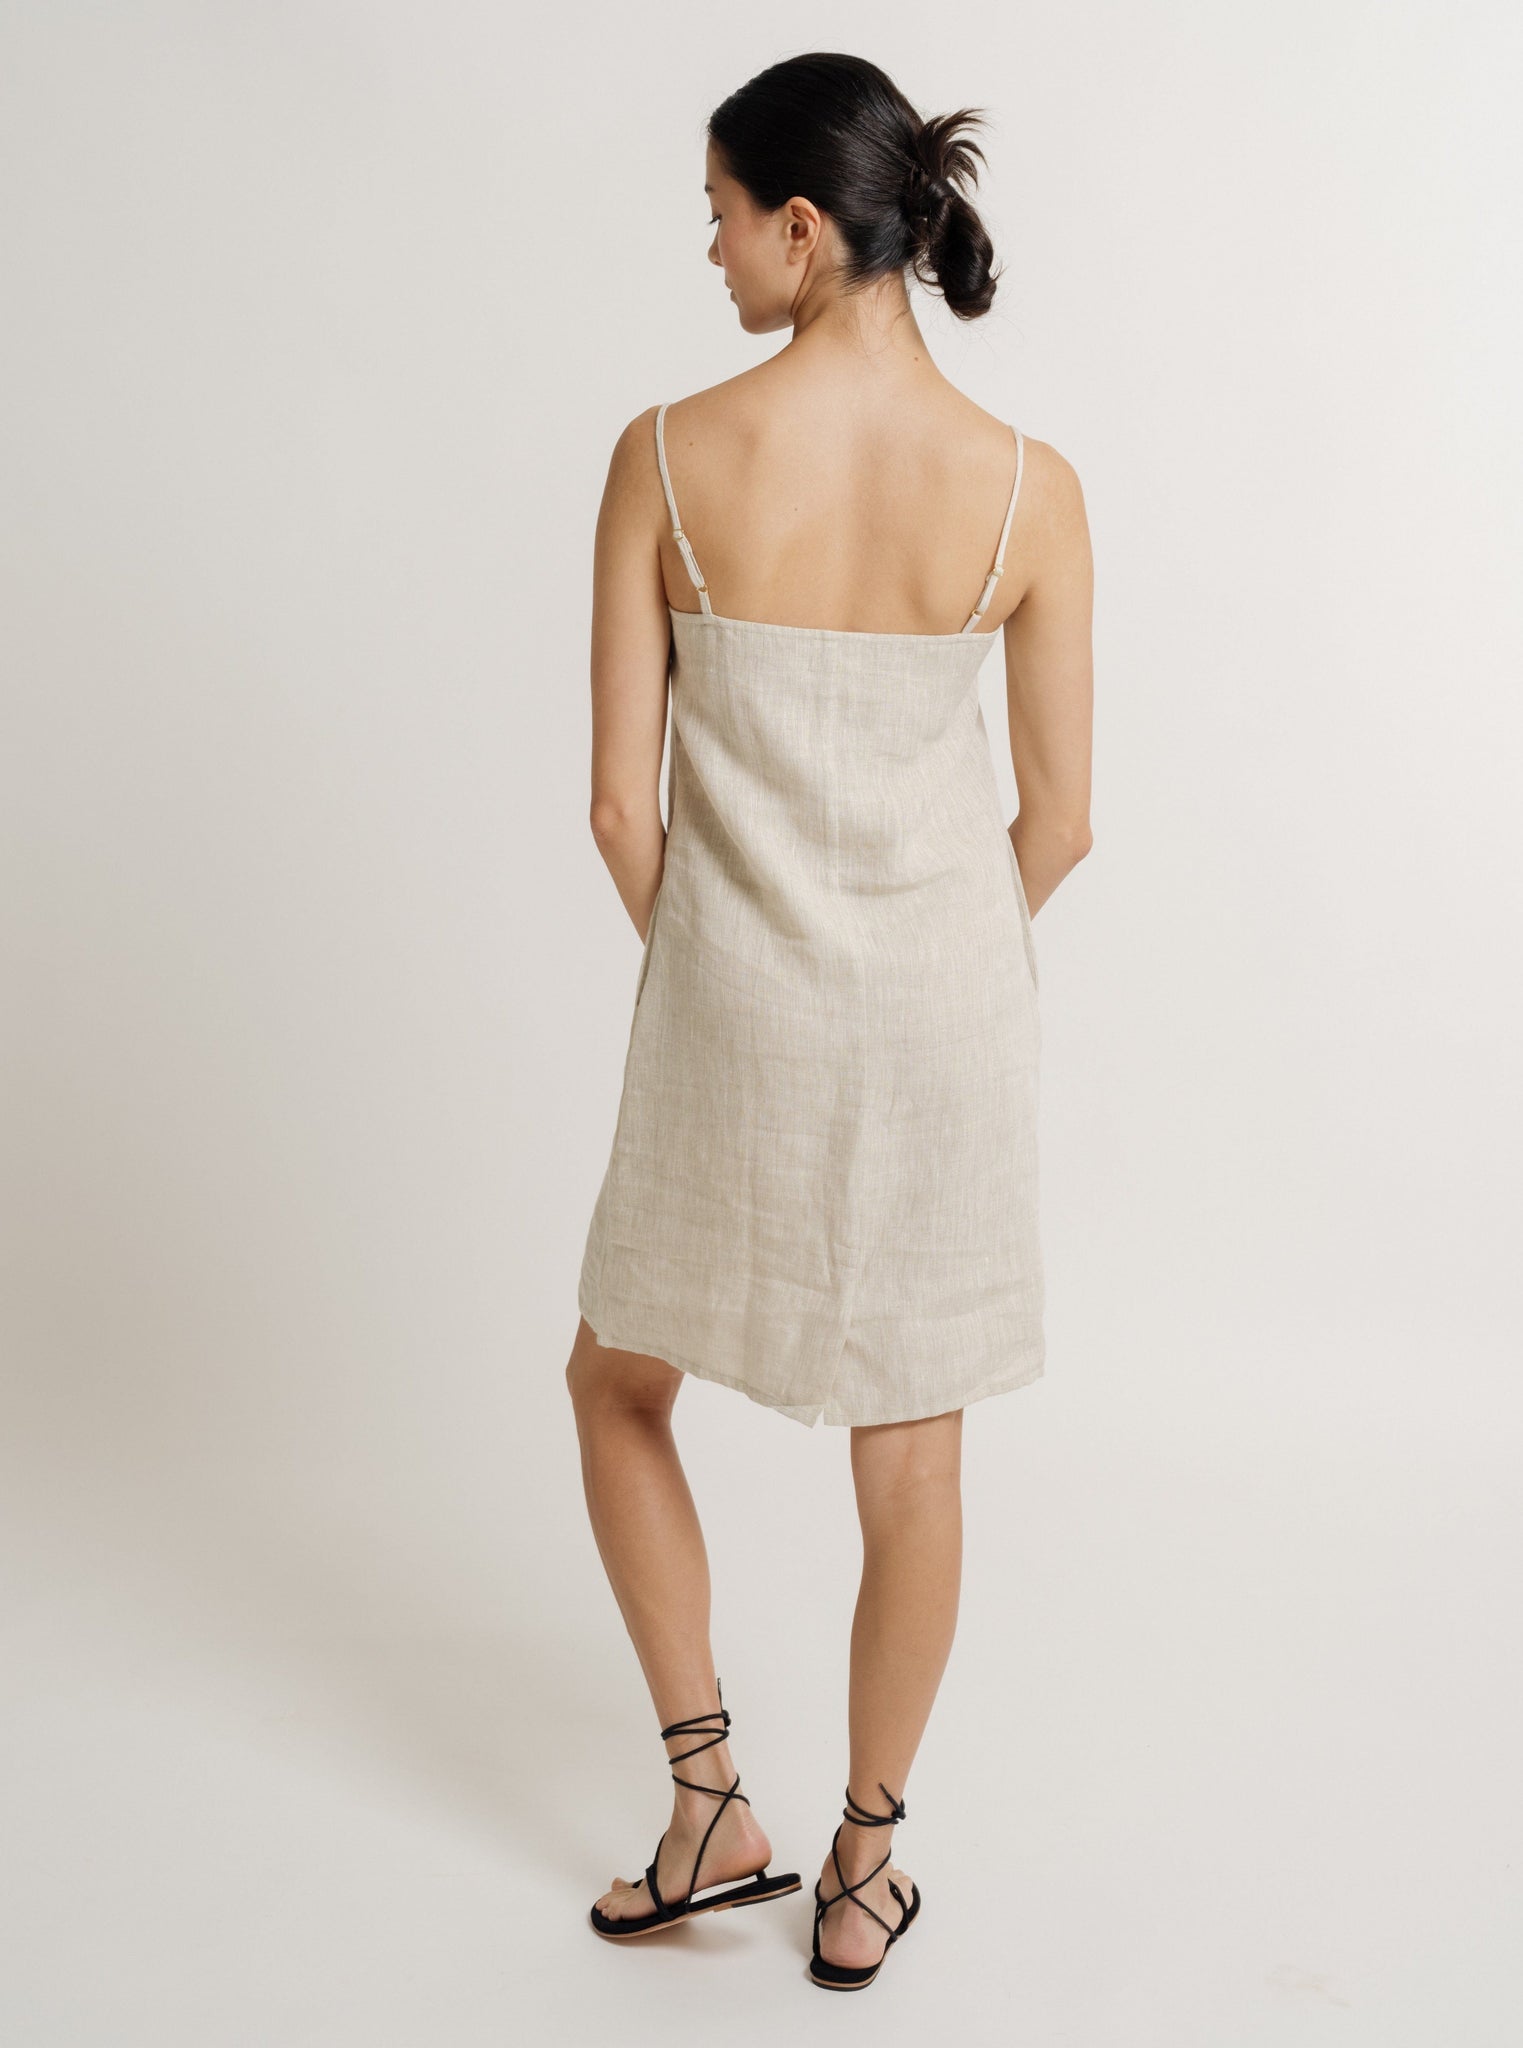 The back view of a woman wearing a Linen Mini Dress - Natural Linen - Pre-order with adjustable straps.